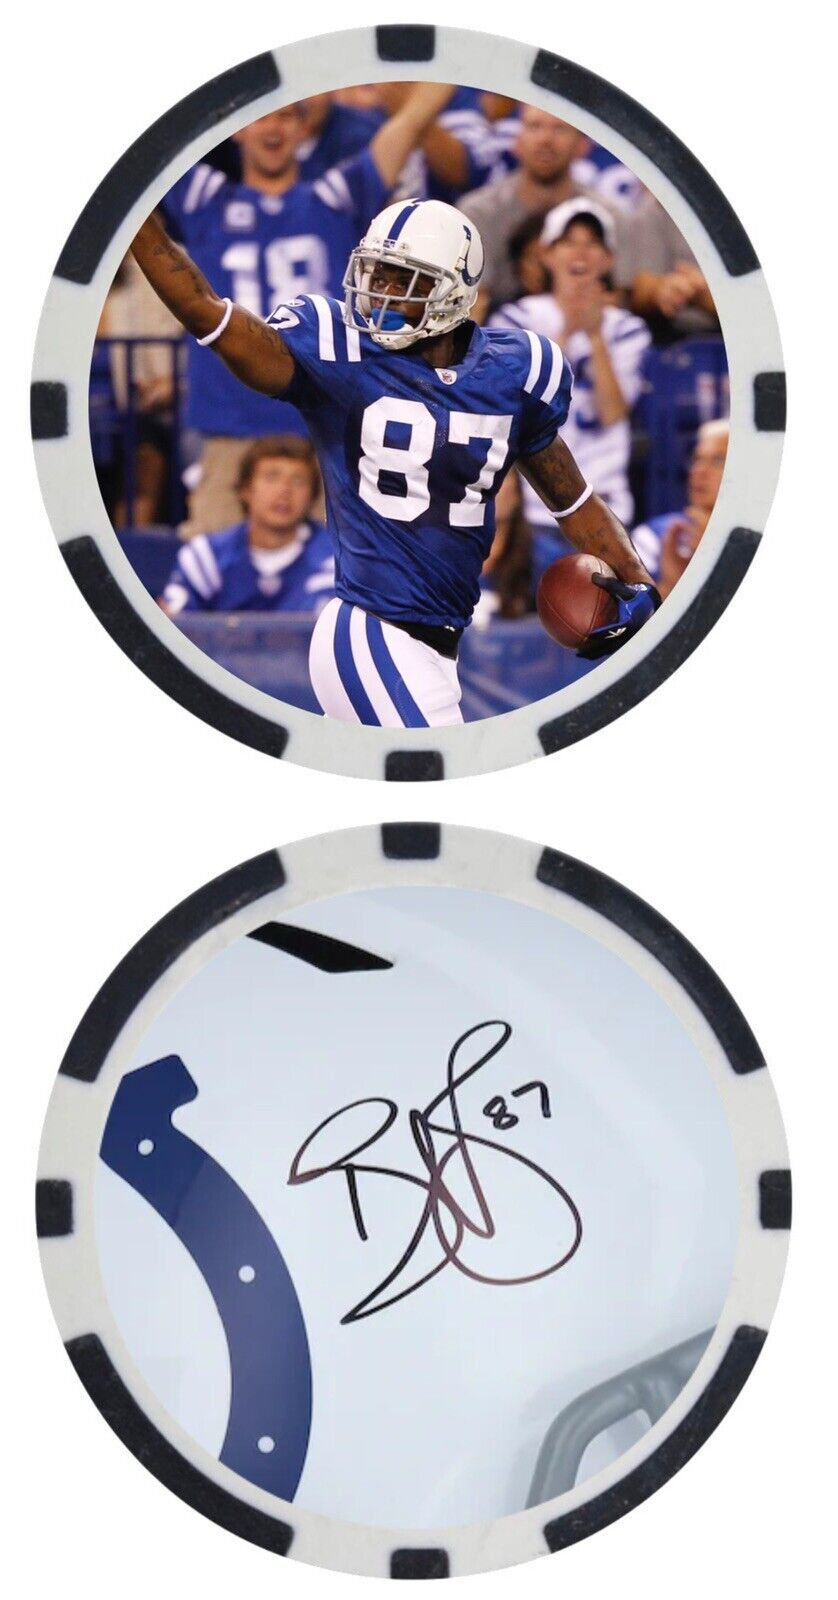 REGGIE WAYNE - INDIANAPOLIS COLTS - POKER CHIP/BALL MARKER *SIGNED/AUTO***